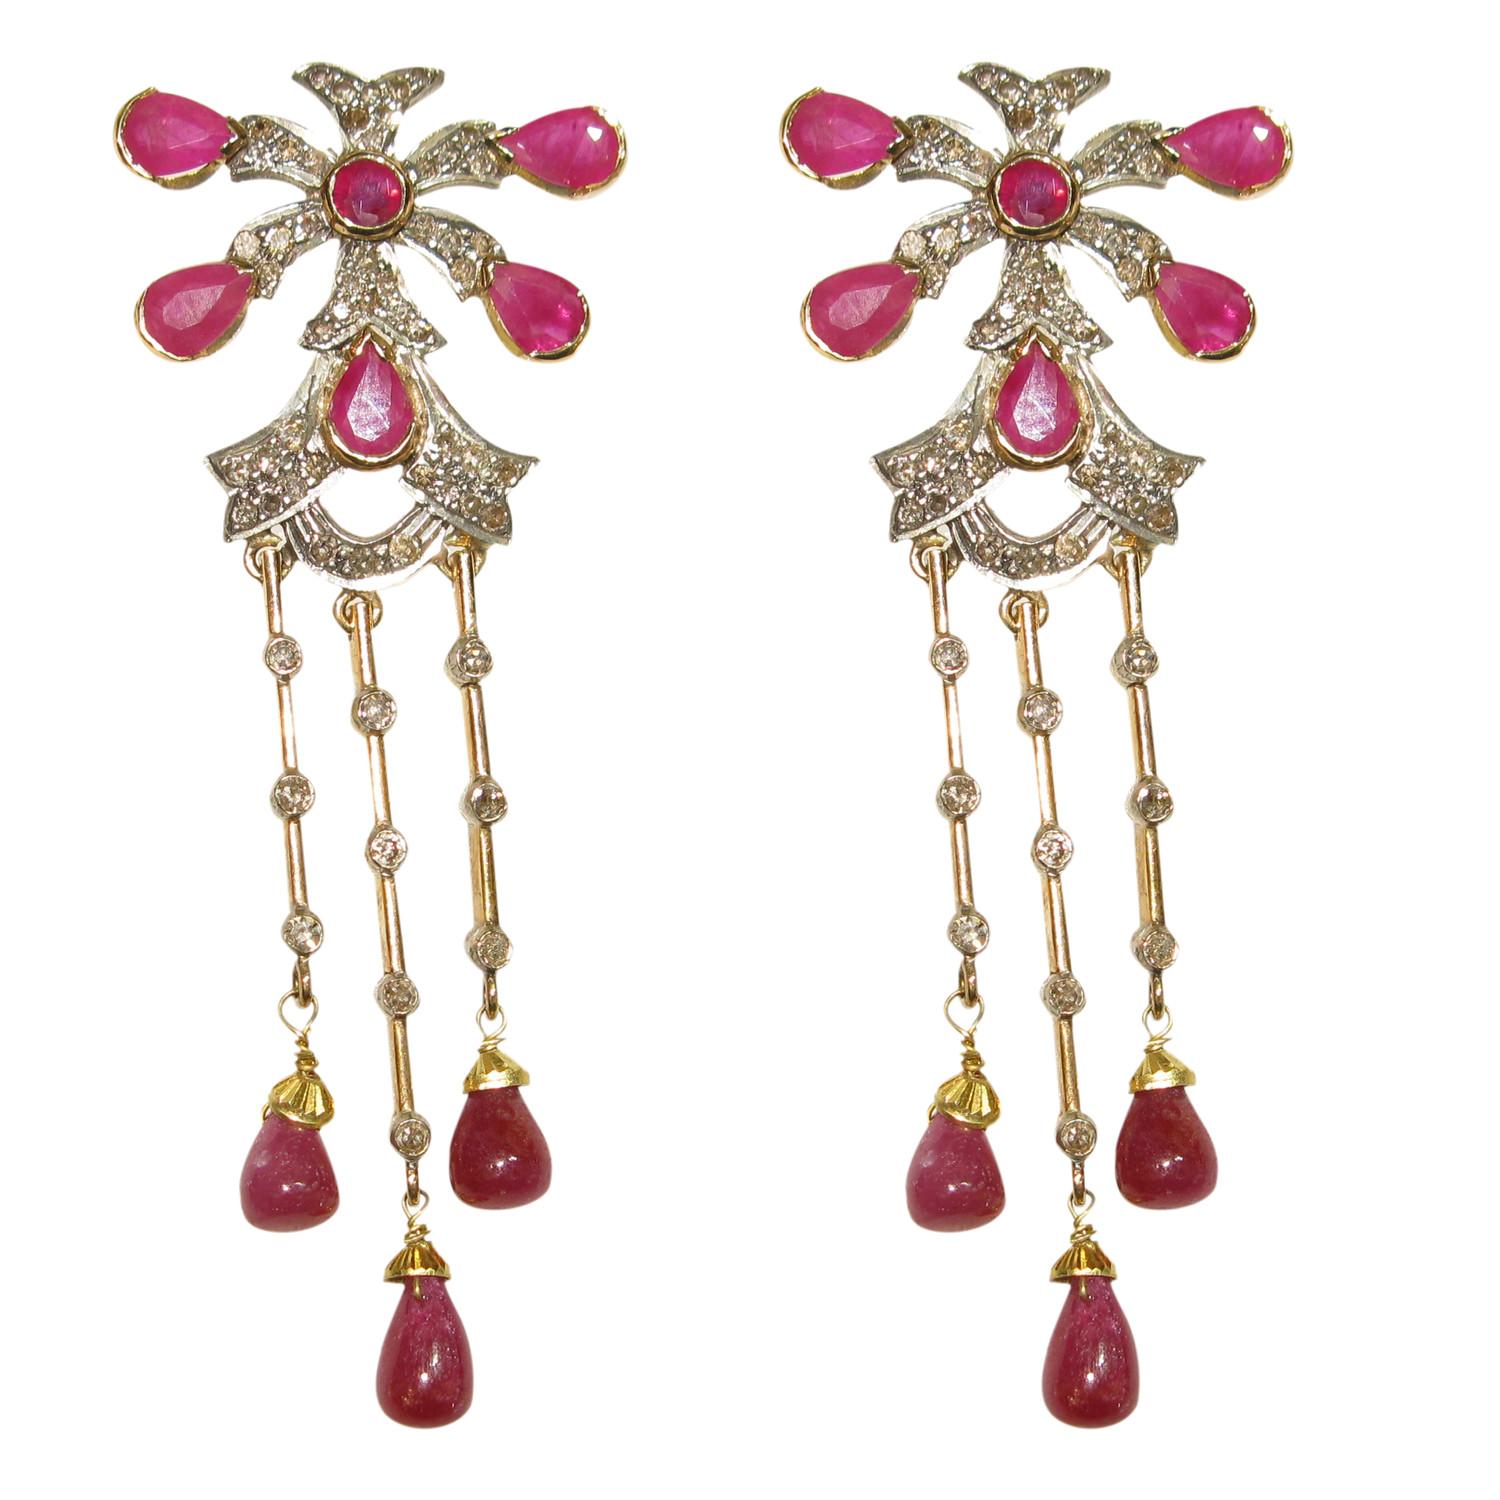 Mixed Cut Pear Shaped Ruby Long Earrings with Diamonds Made in 18k Gold For Sale